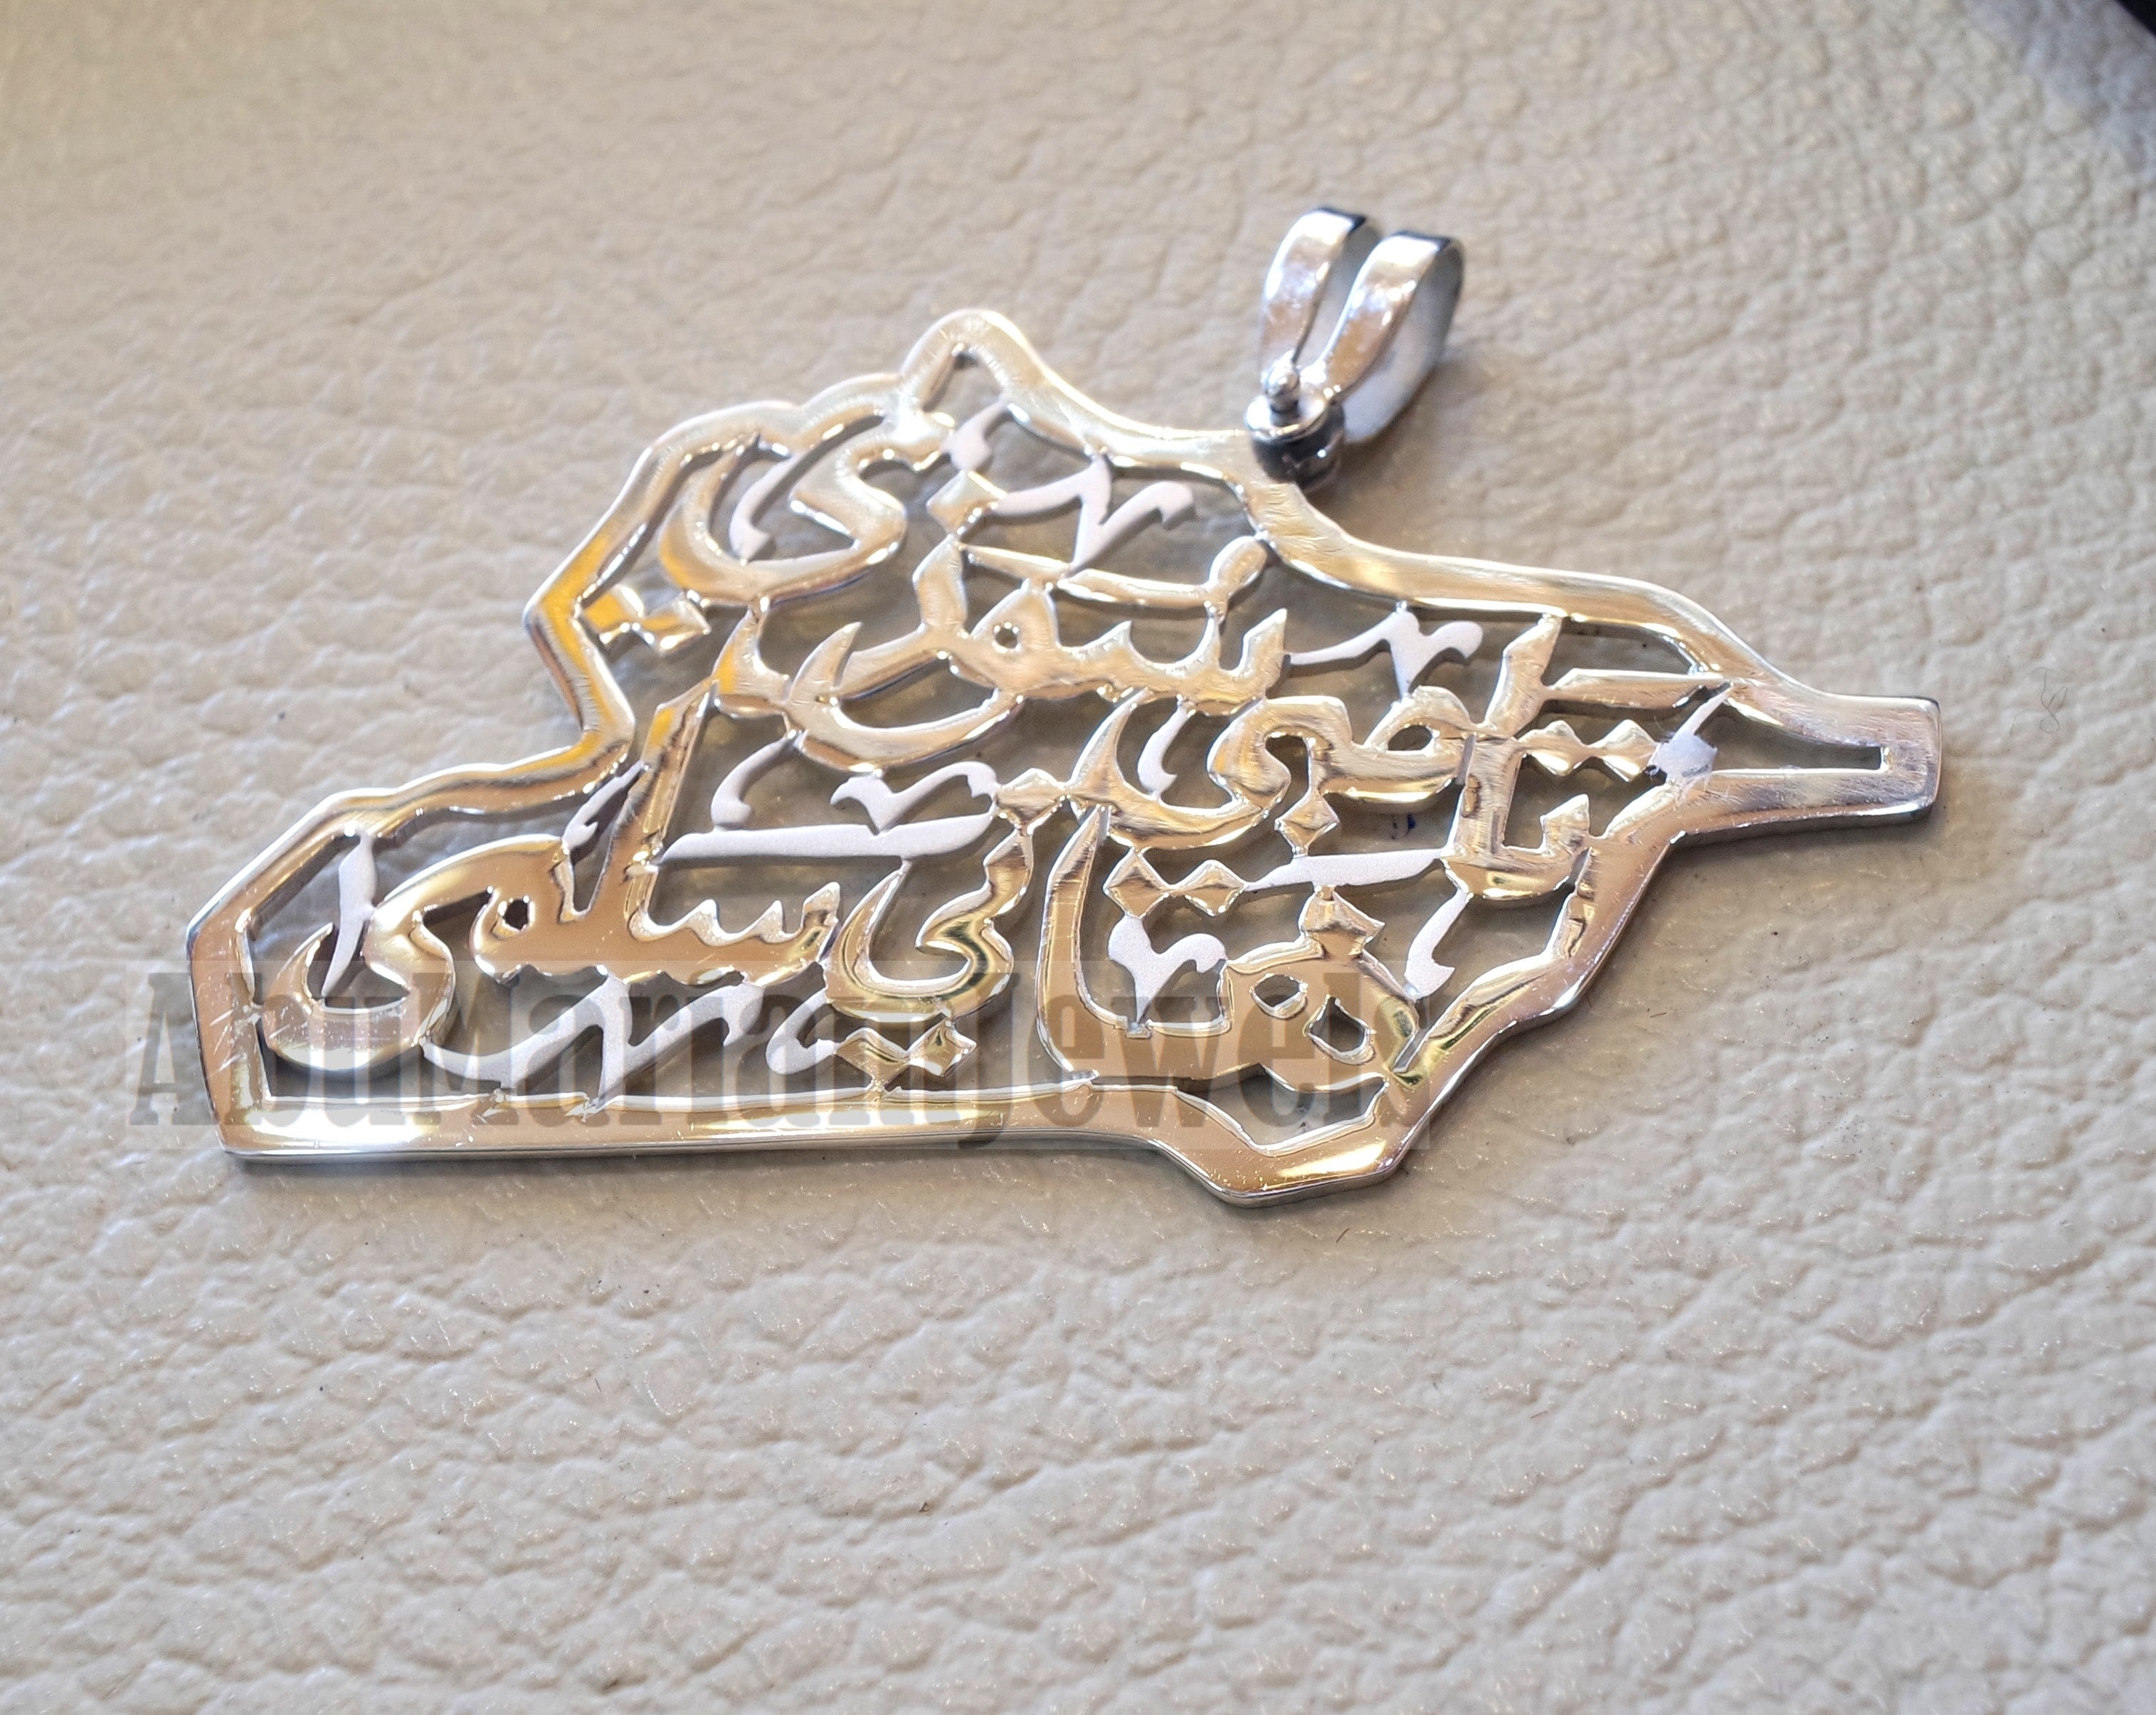 Syria map pendant names personalized customized 2 - 4 names or phrase sterling silver 925 k high quality jewelry arabic  SY-2 خارطه سوريا